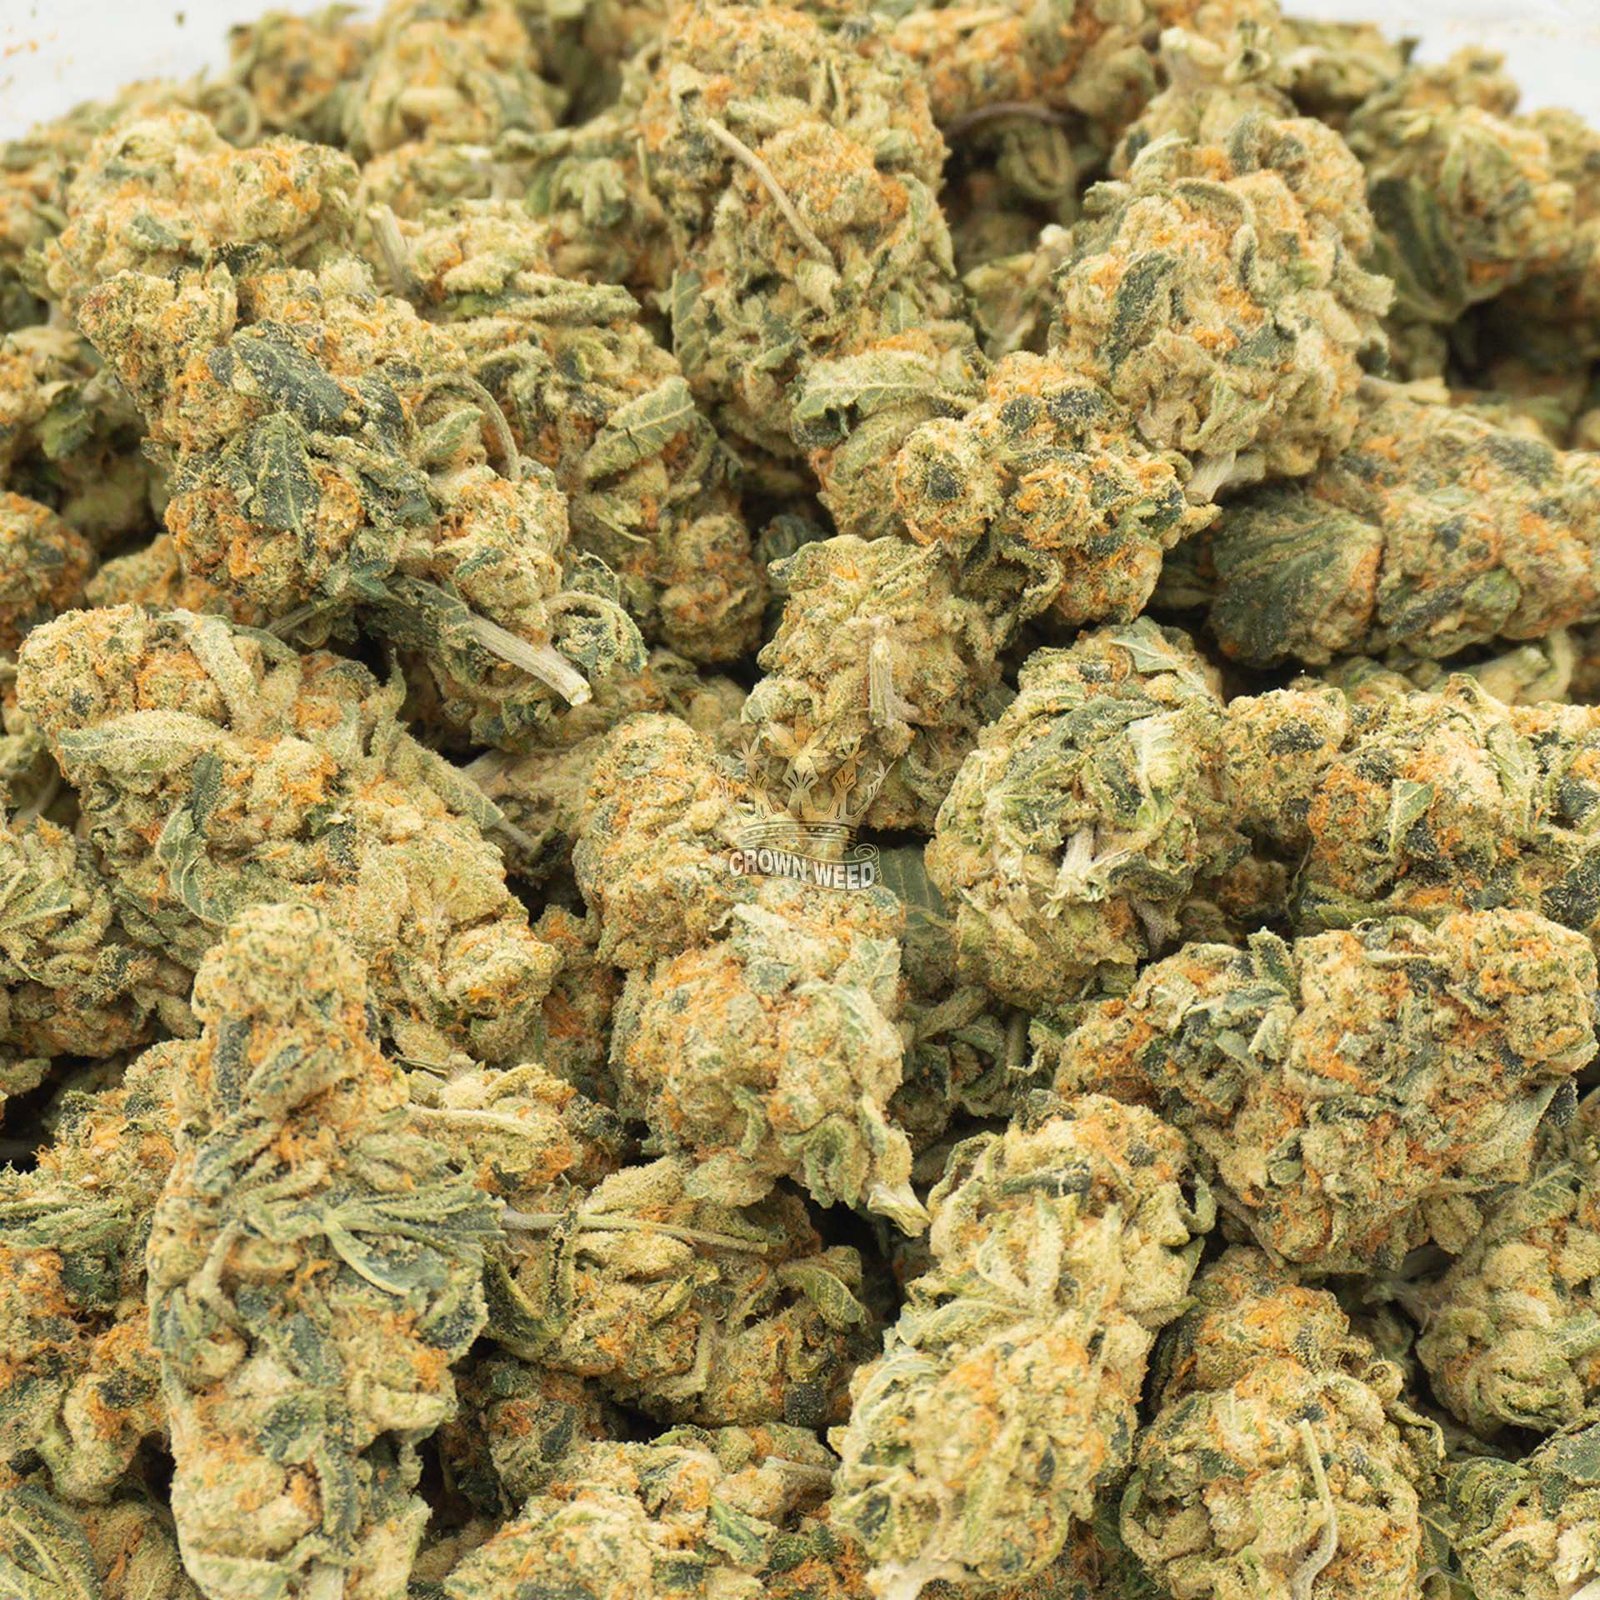 cali bubba weed strain - buy oz special price